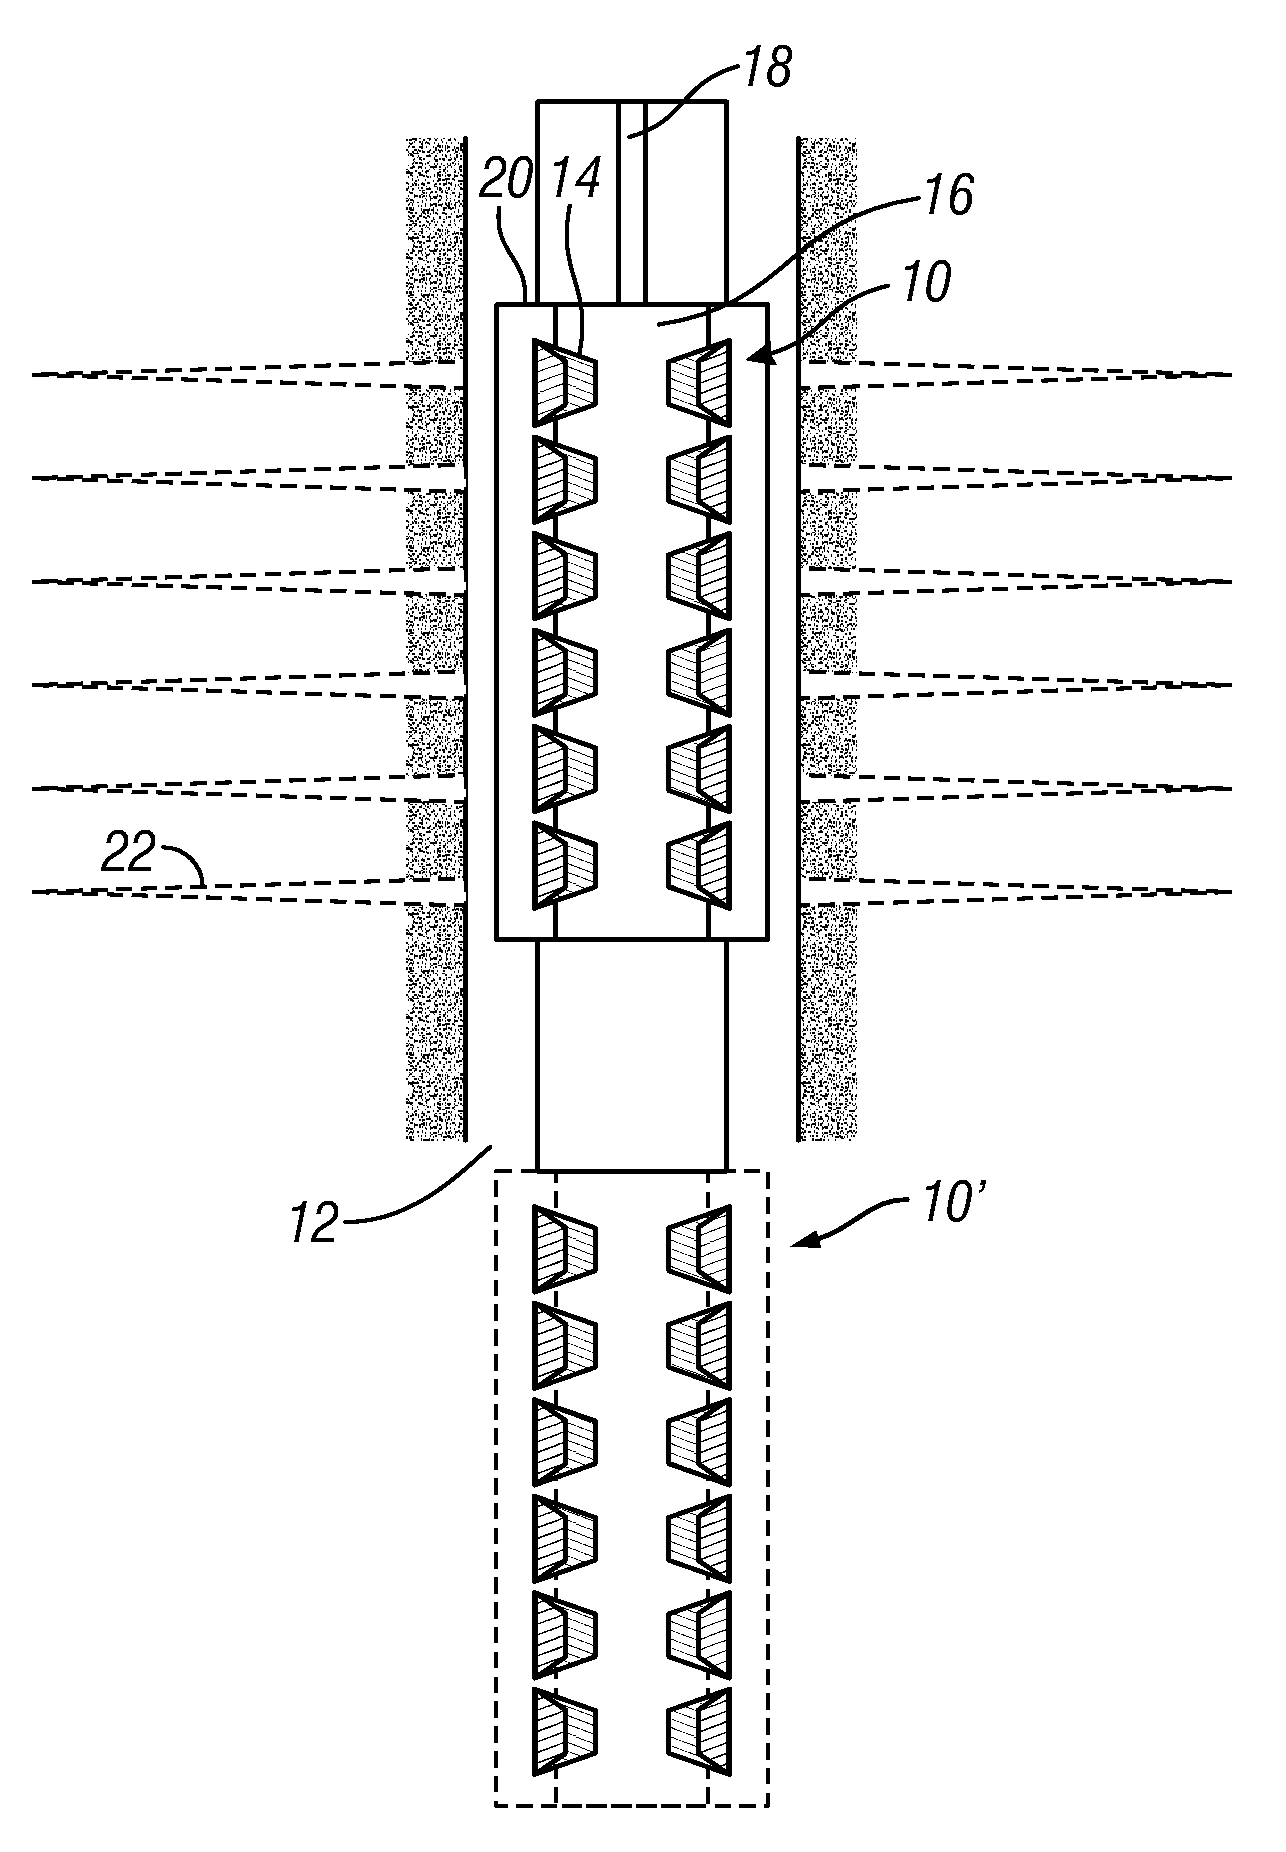 System and method for enhanced wellbore perforations